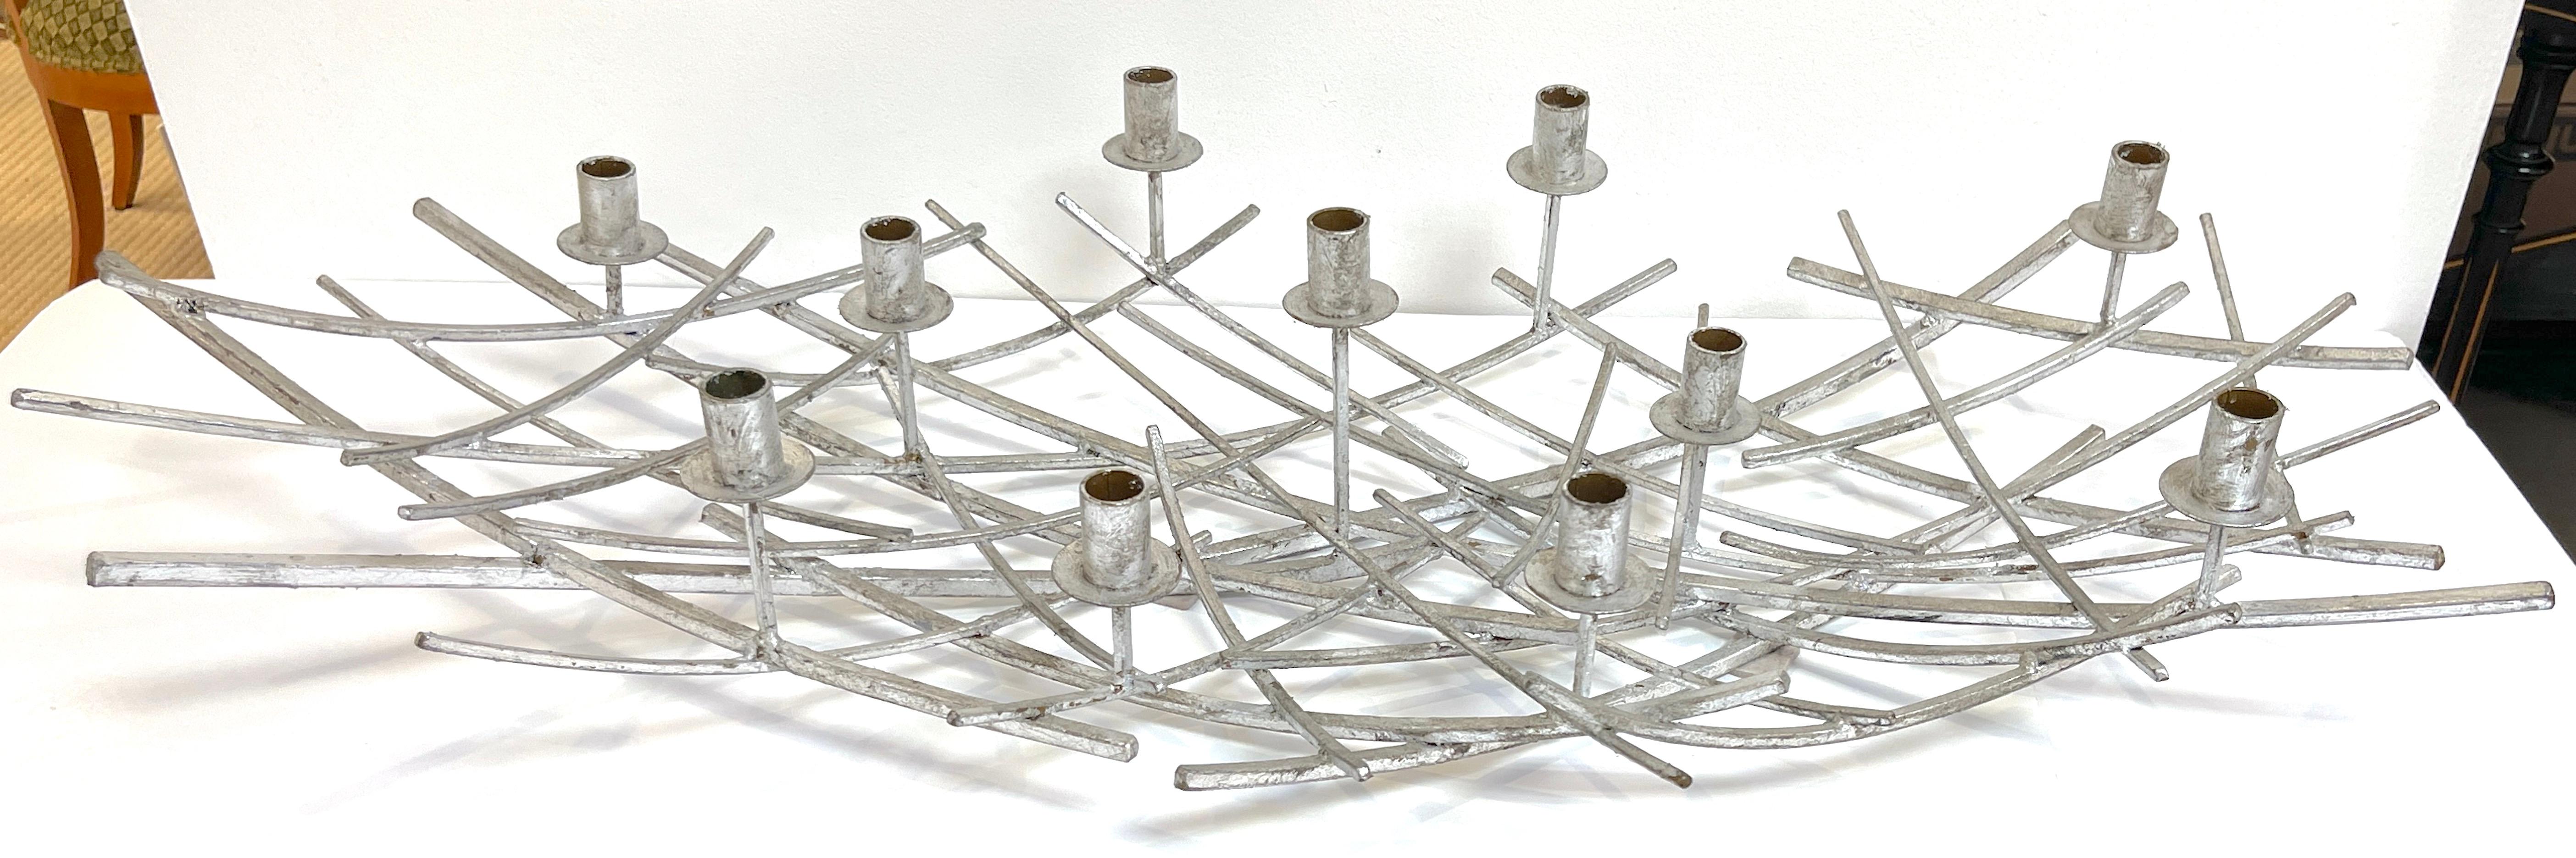 12 Light French Modern Kinetic Silvered Metal Candelabra Centerpiece   In Good Condition For Sale In West Palm Beach, FL